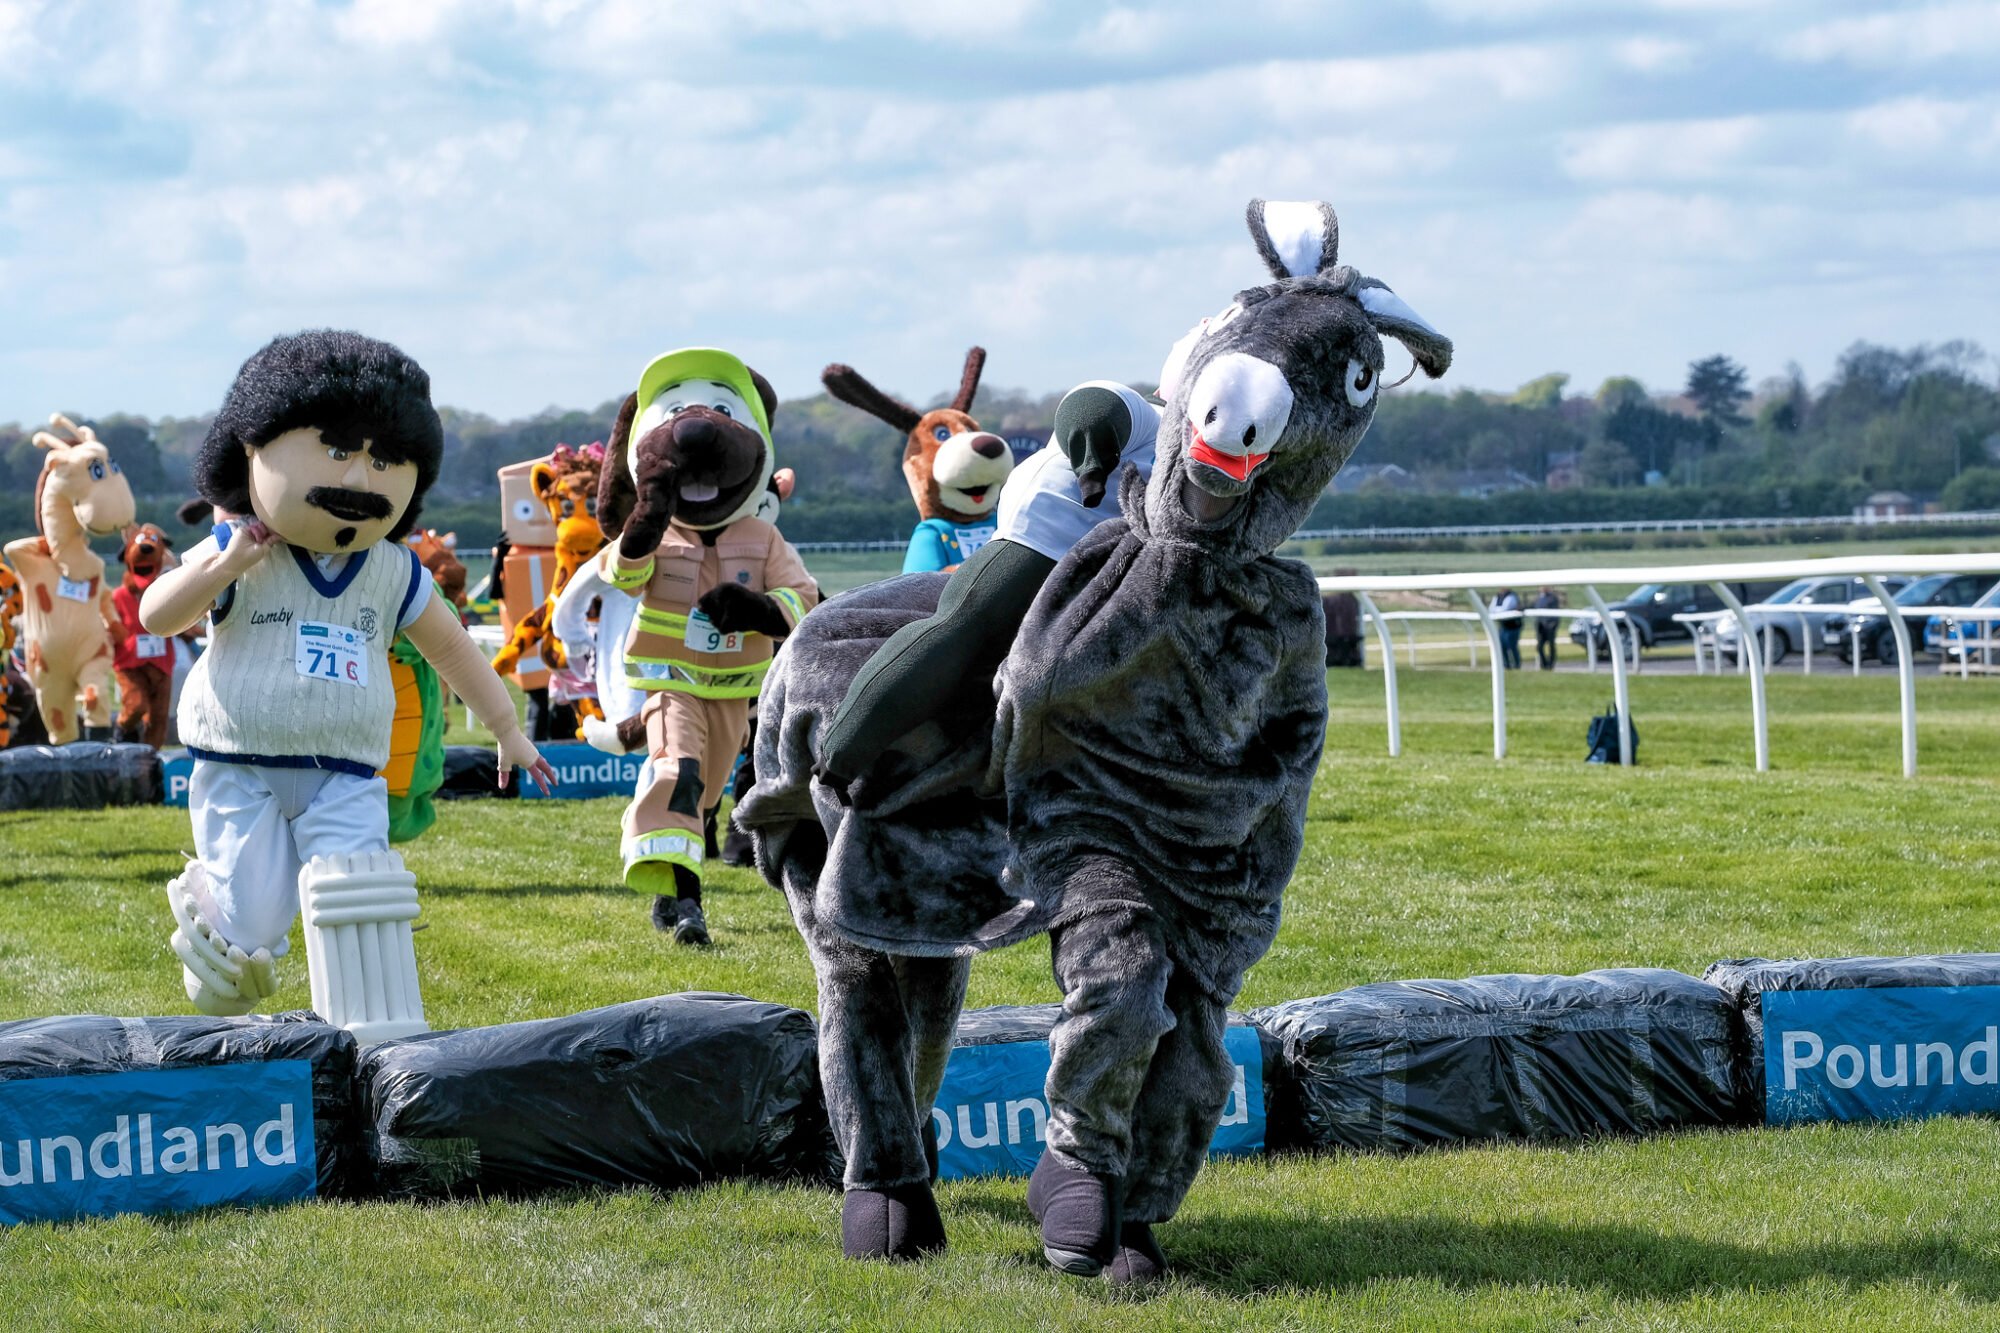 Image name Credit Mike Hurdiss 0585 the 5 image from the post The Mascot Gold Cup in Yorkshire.com.